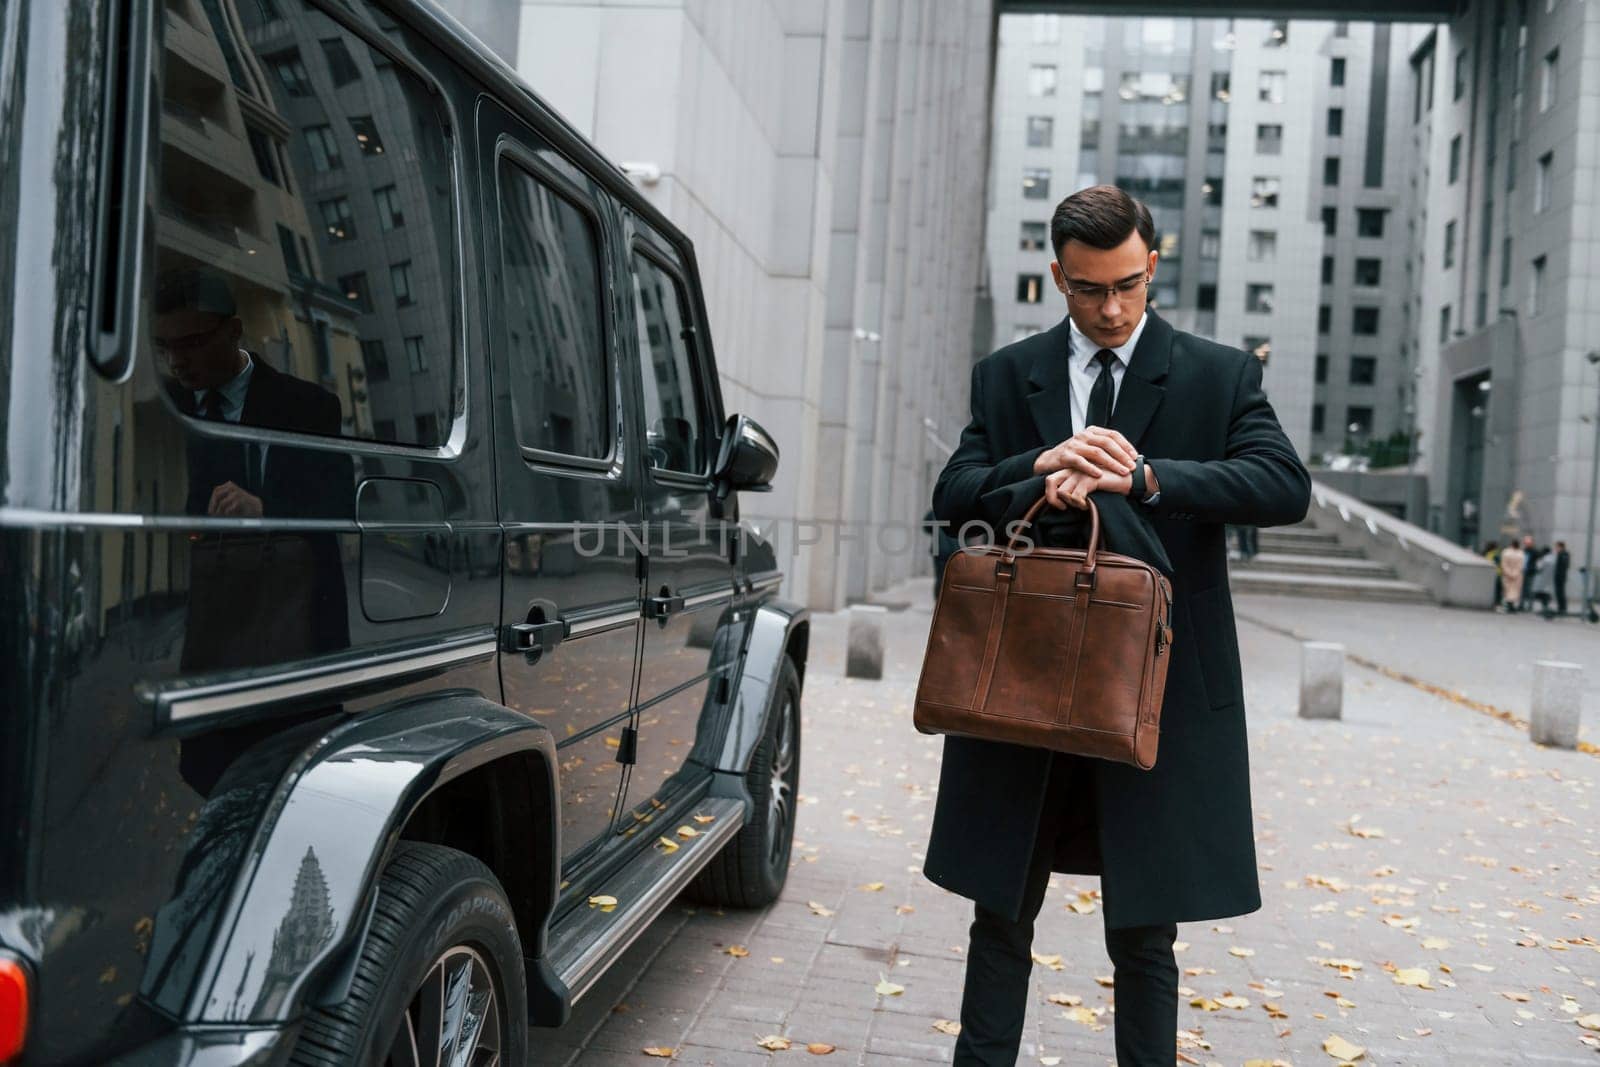 Standing near black car. Businessman in black suit and tie is outdoors in the city.